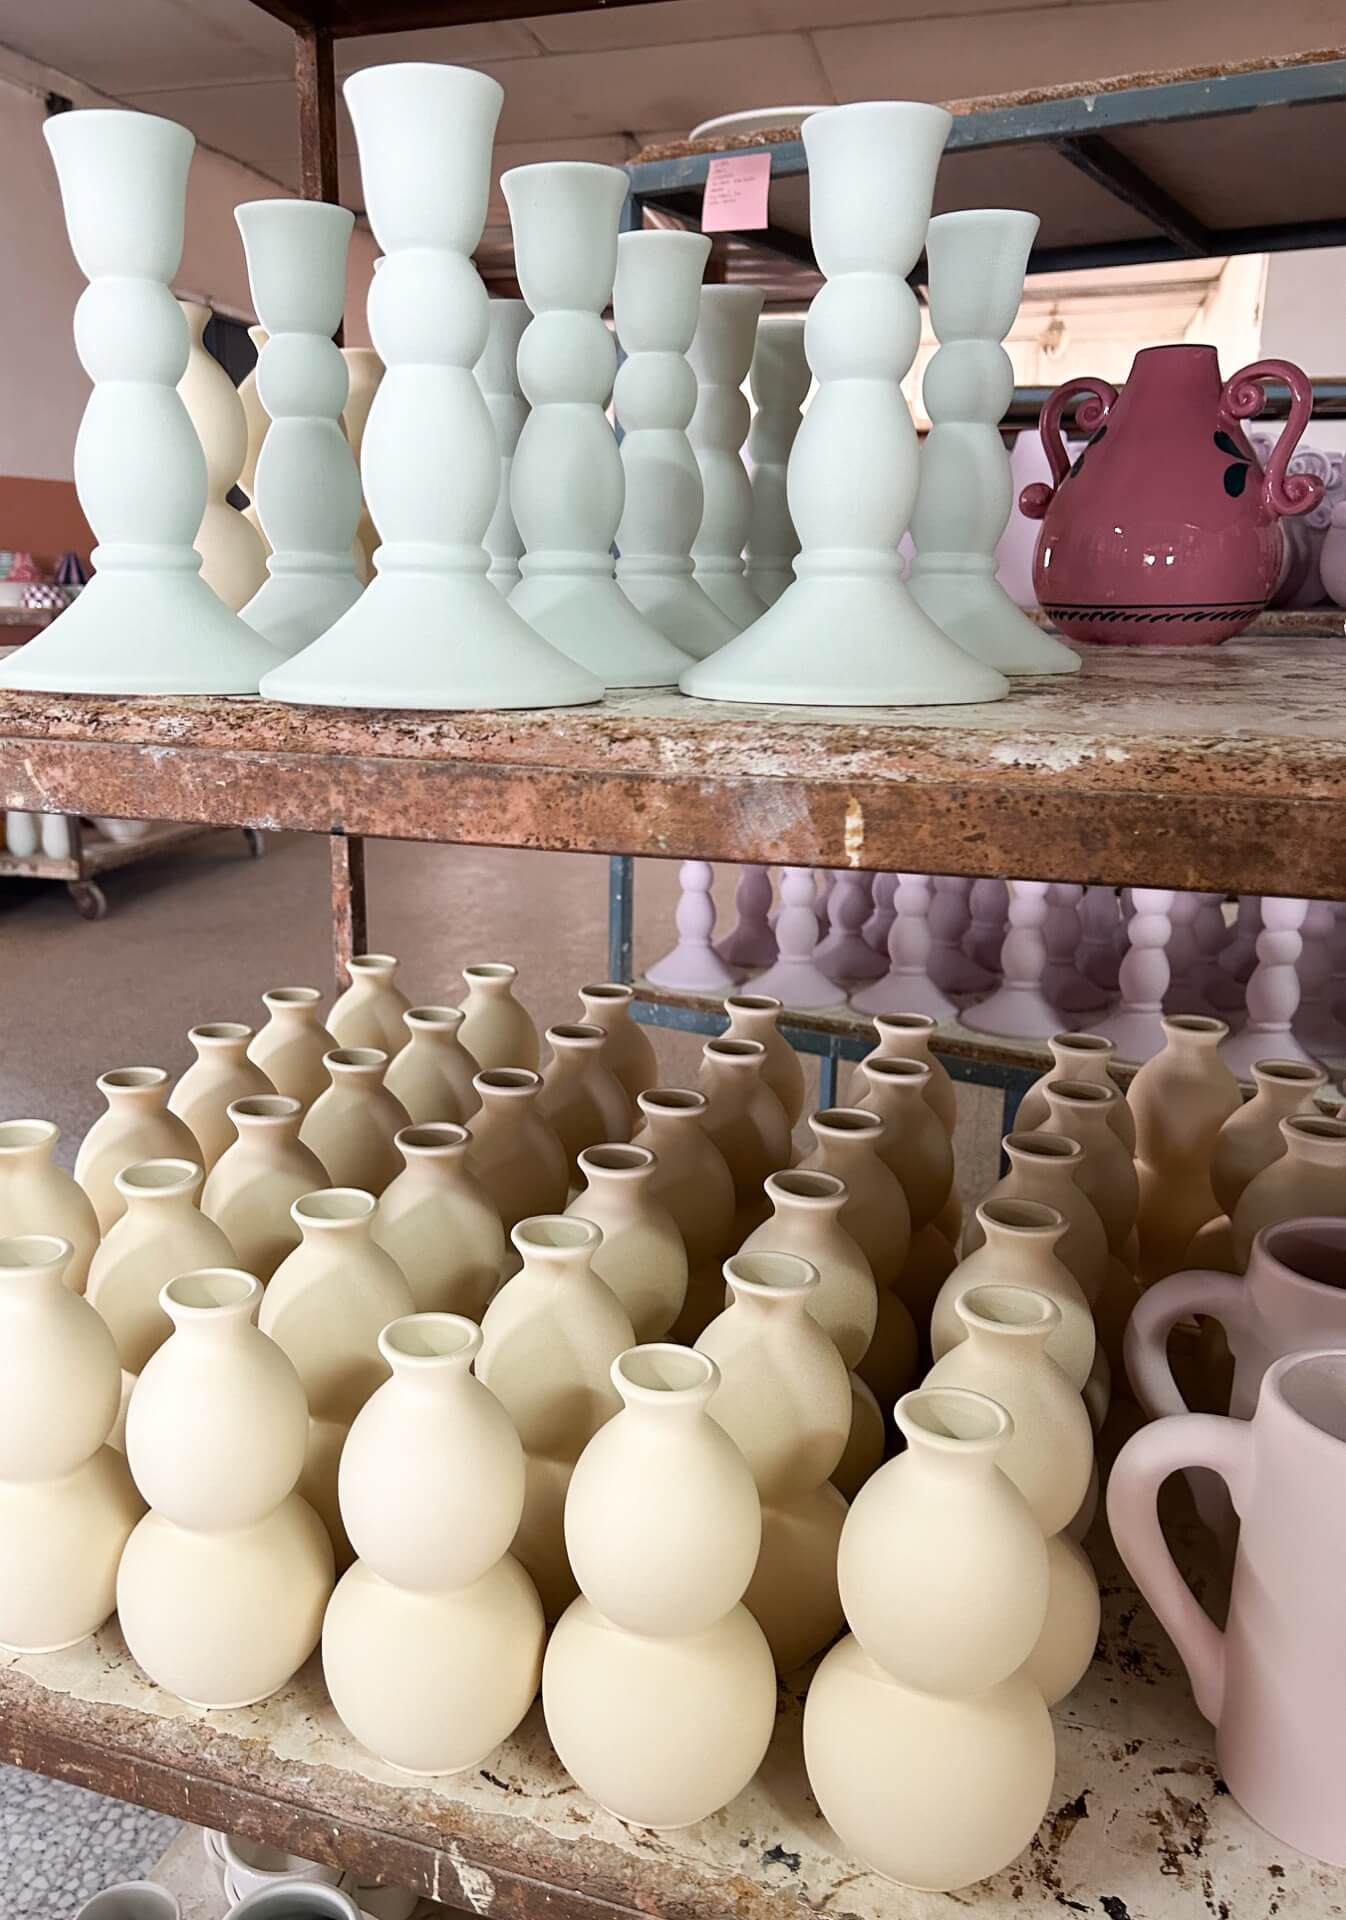 Colourful vintage antique style vases in process from independent UK contemporary homeware brand Vaisselle